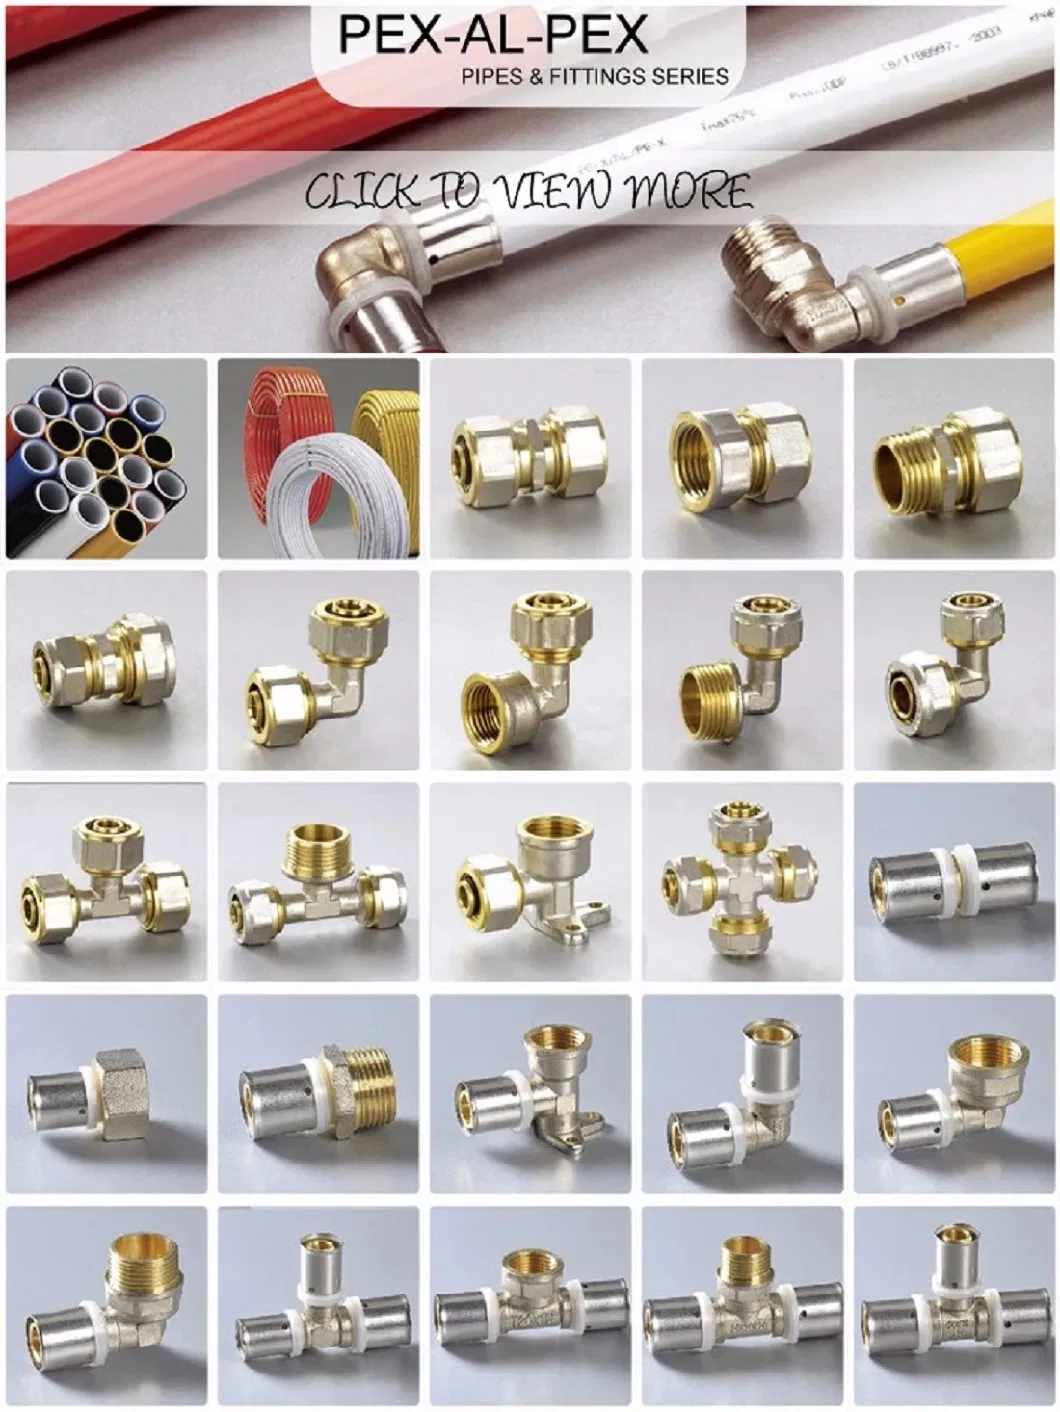 High Quality Brass Parts, Brass Machining Parts, Brass Machining Parts Metal Tee Fitting Sanitary Fittings Elbow Union Reducer Fitting Bathroom Pipe Fitting